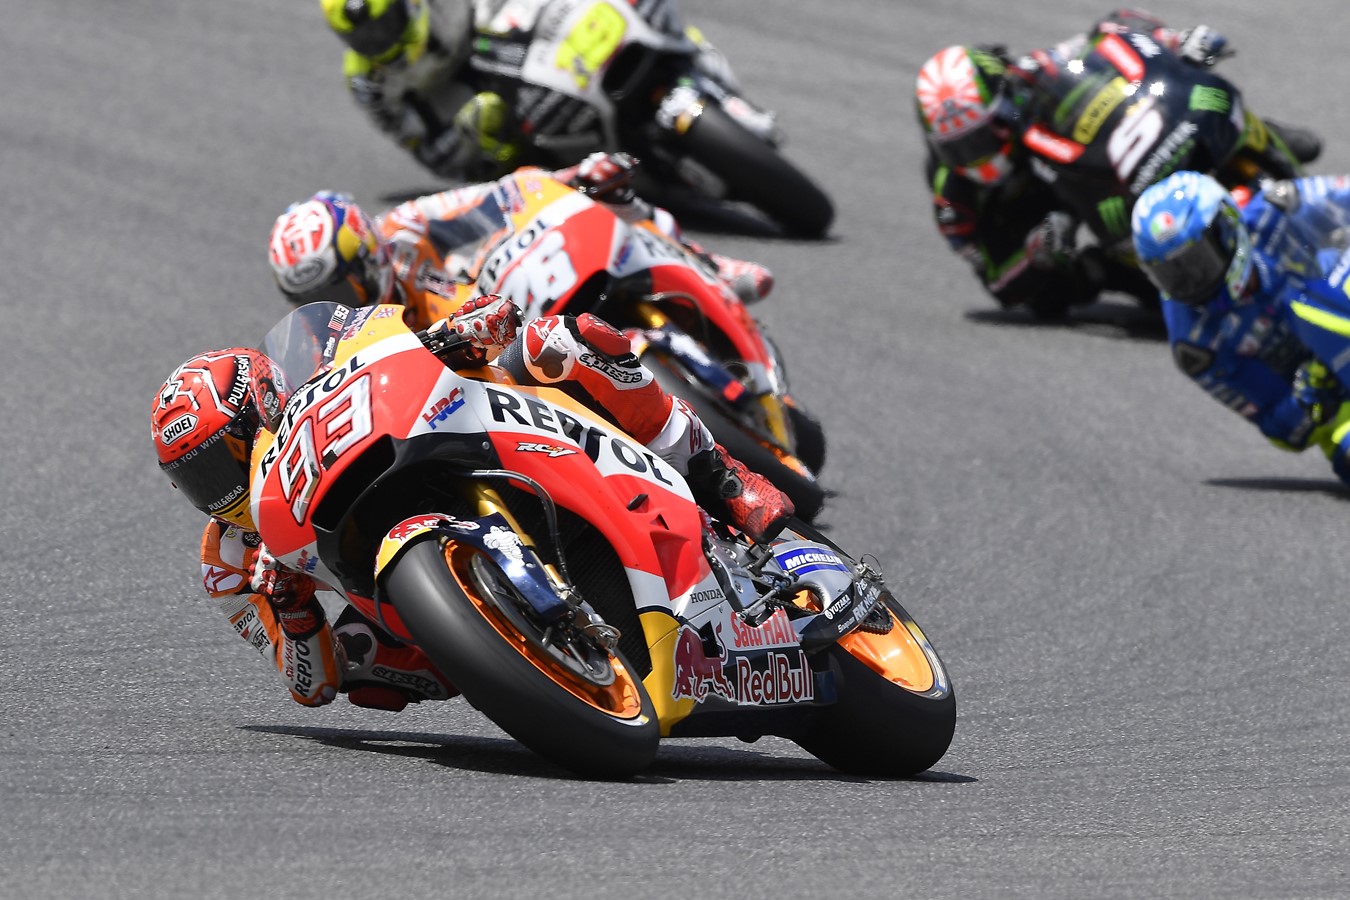 Marquez Secures Sixth Place at Mugello